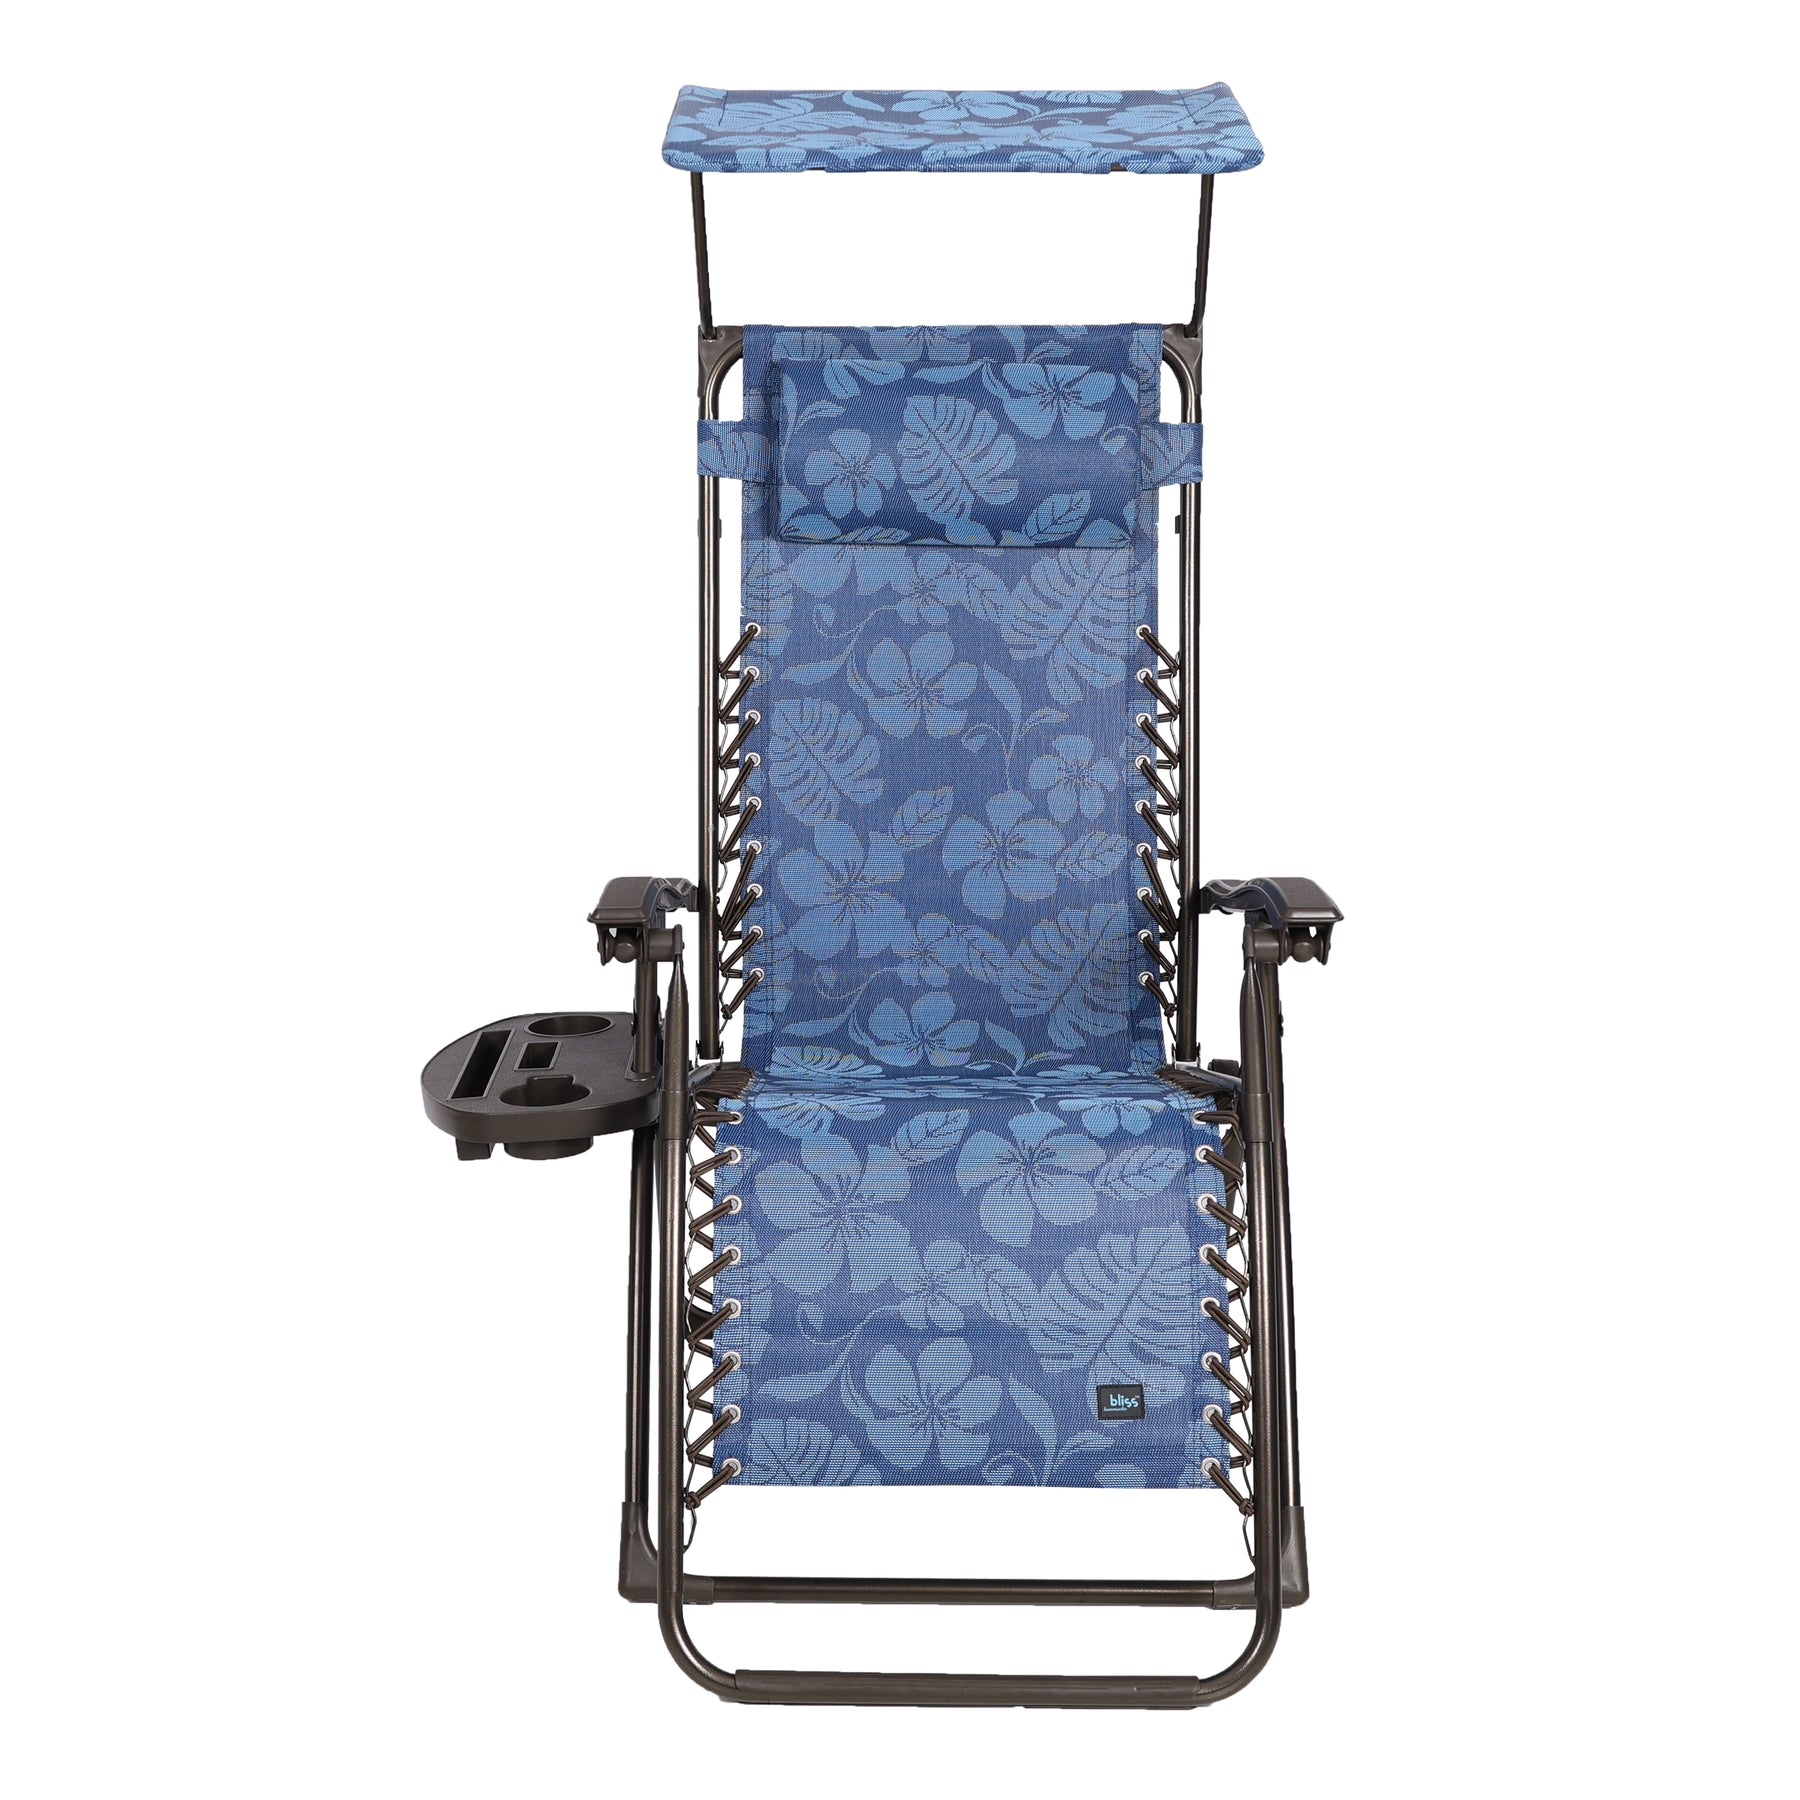 Front view of a Bliss Hammocks 26-inch Gravity Free Chair with a canopy and drink tray in the blue flowers variation.